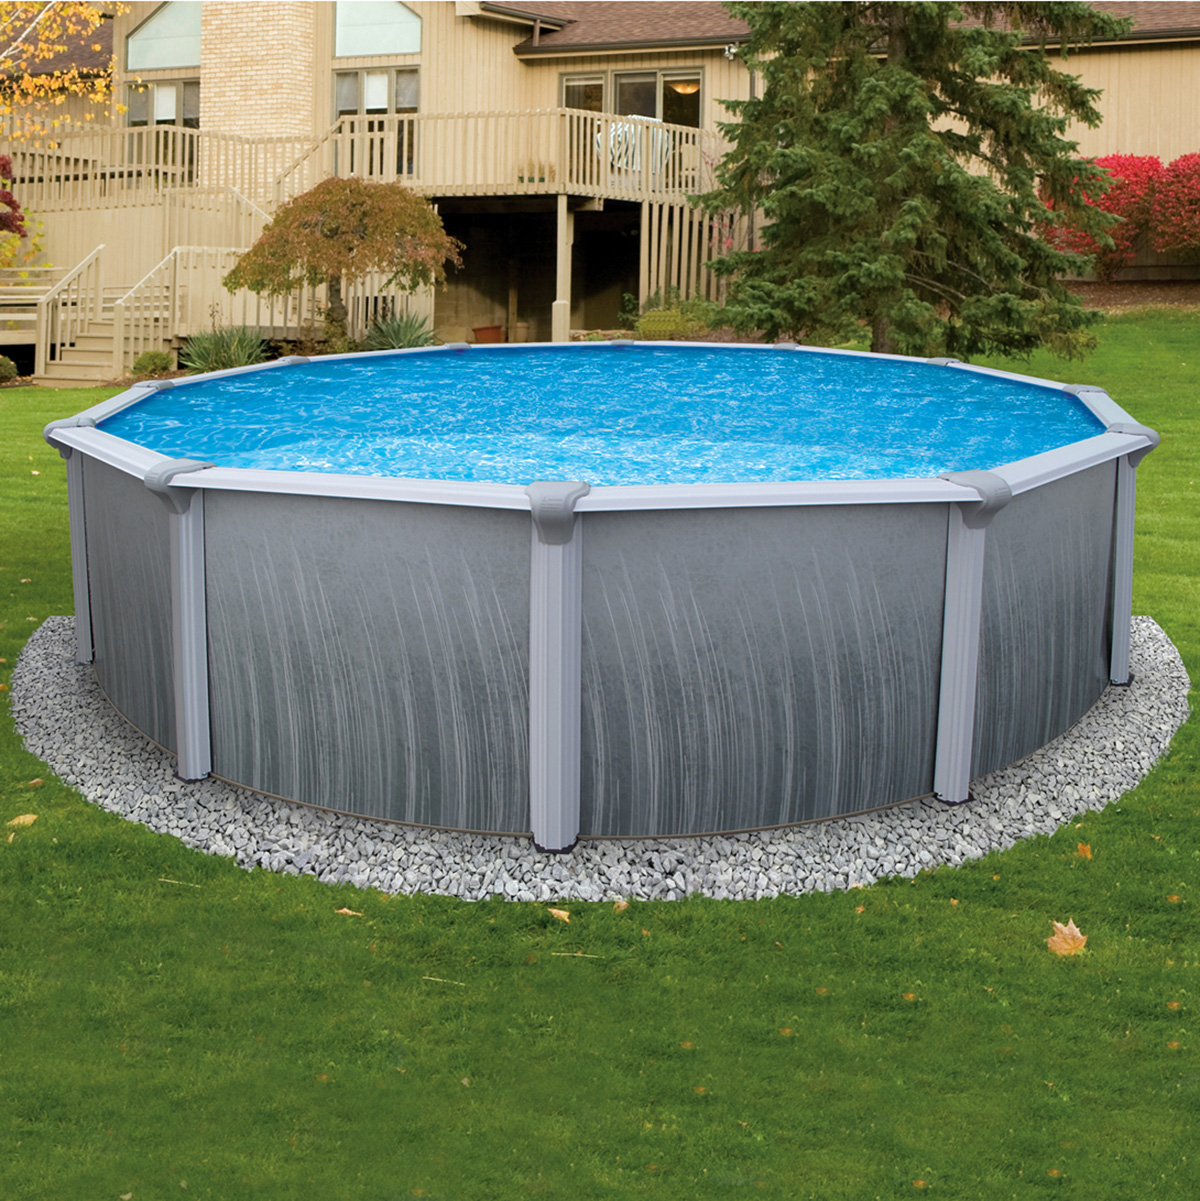 Preparing Your Pool for Severe Summer Weather